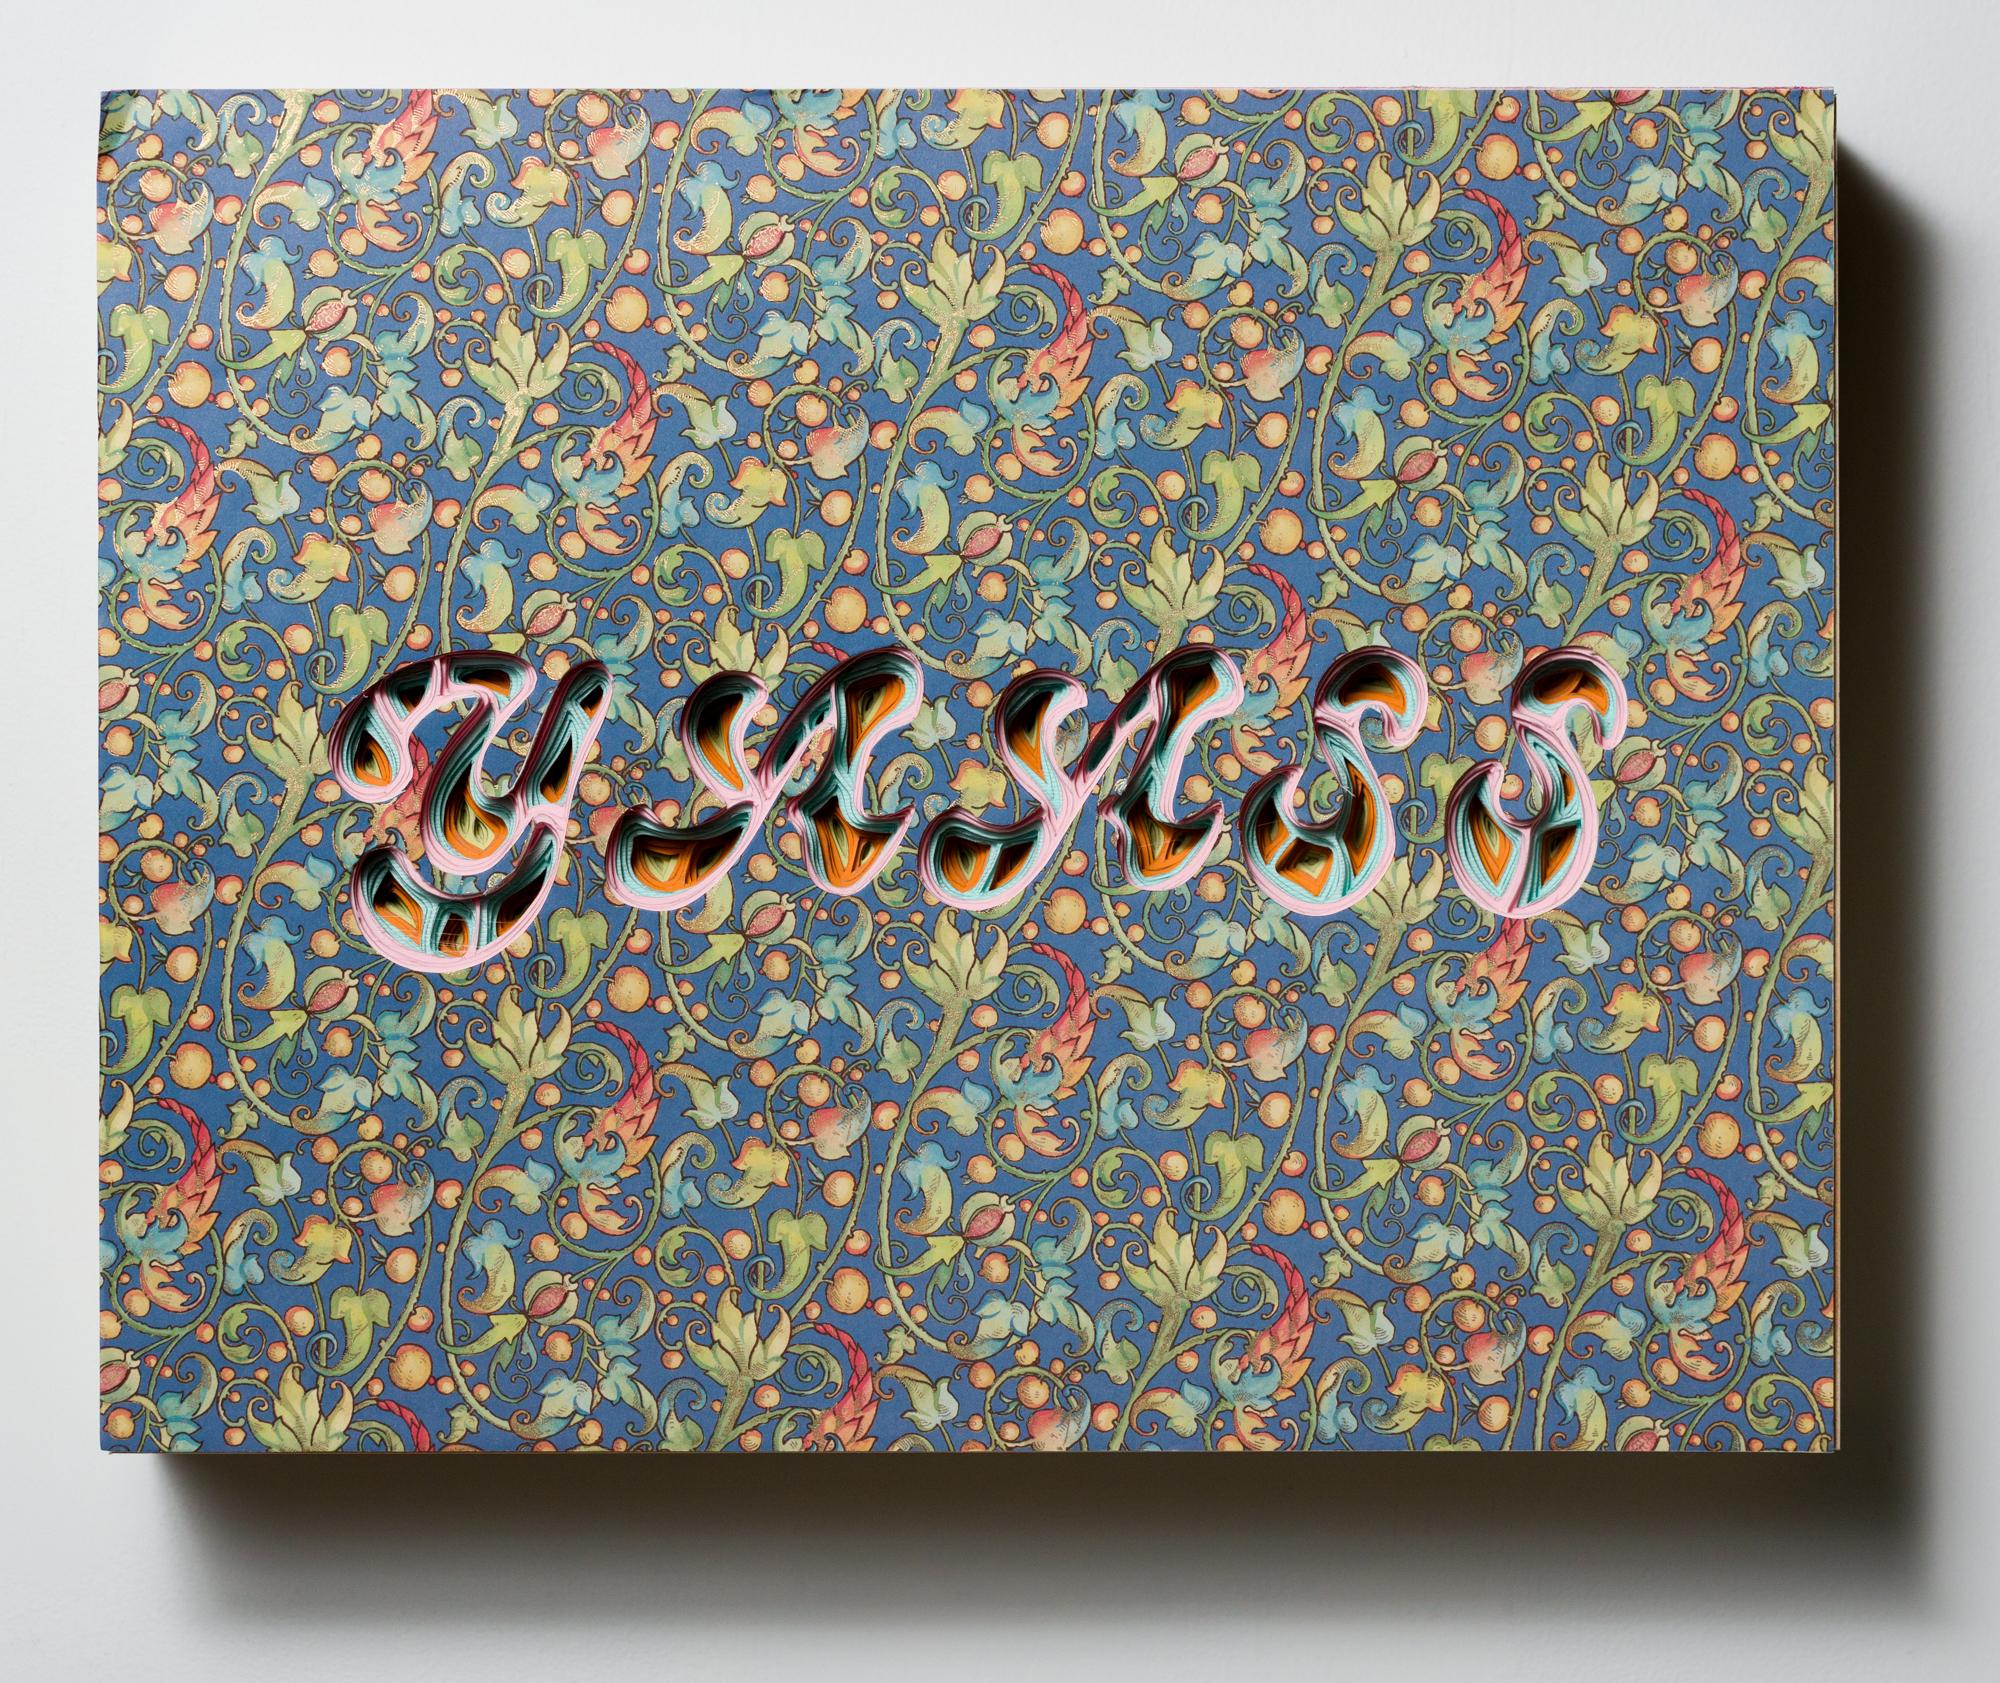 "YAASS" Text, layered and hand-cut paper, mounted on wood panel - Mixed Media Art by Charles Clary